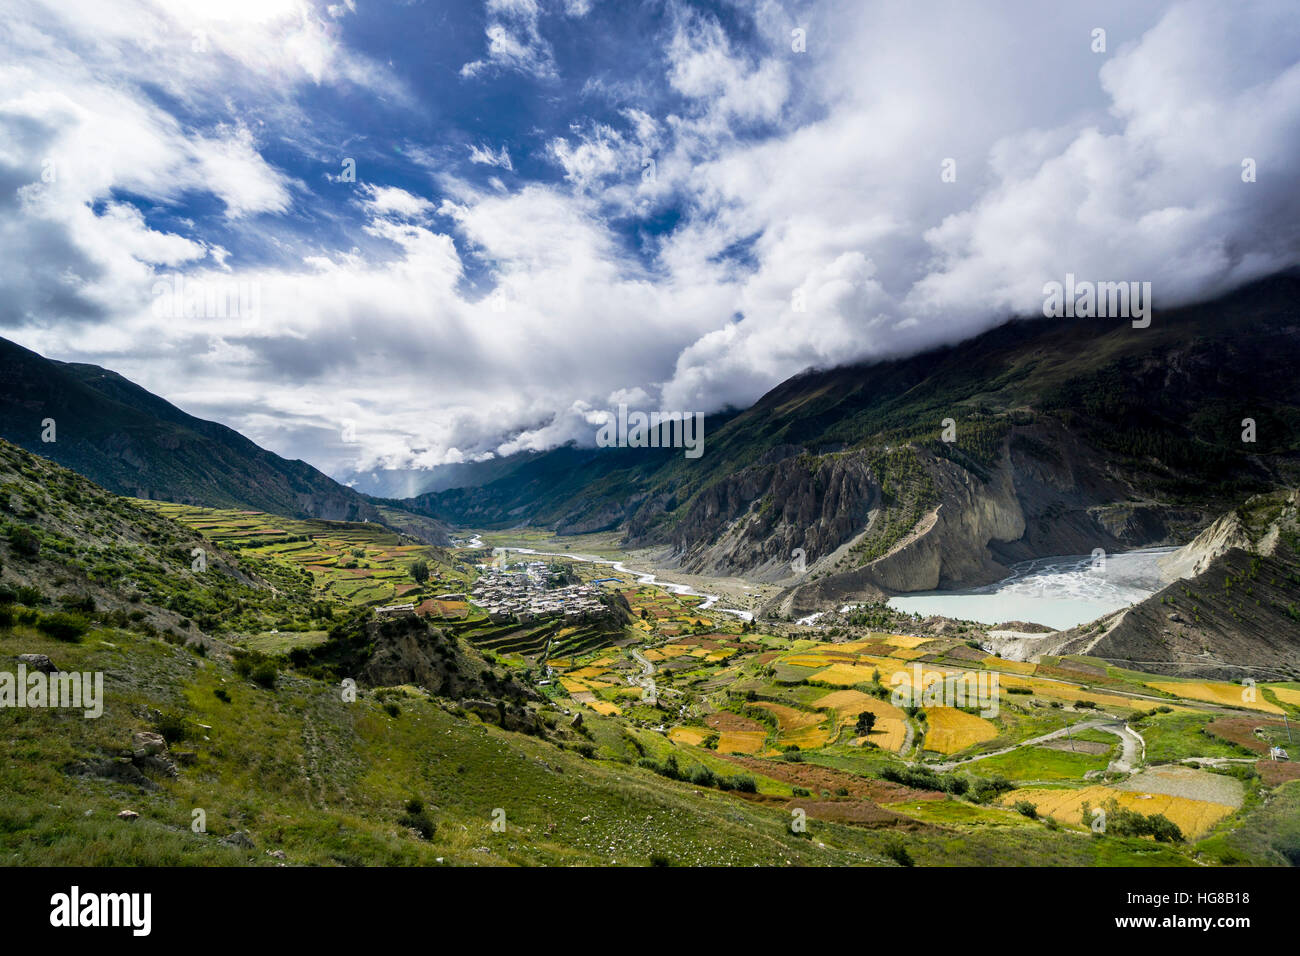 Manang with terrace fields, Upper Marsyangdi valley, Manang District, Nepal Stock Photo